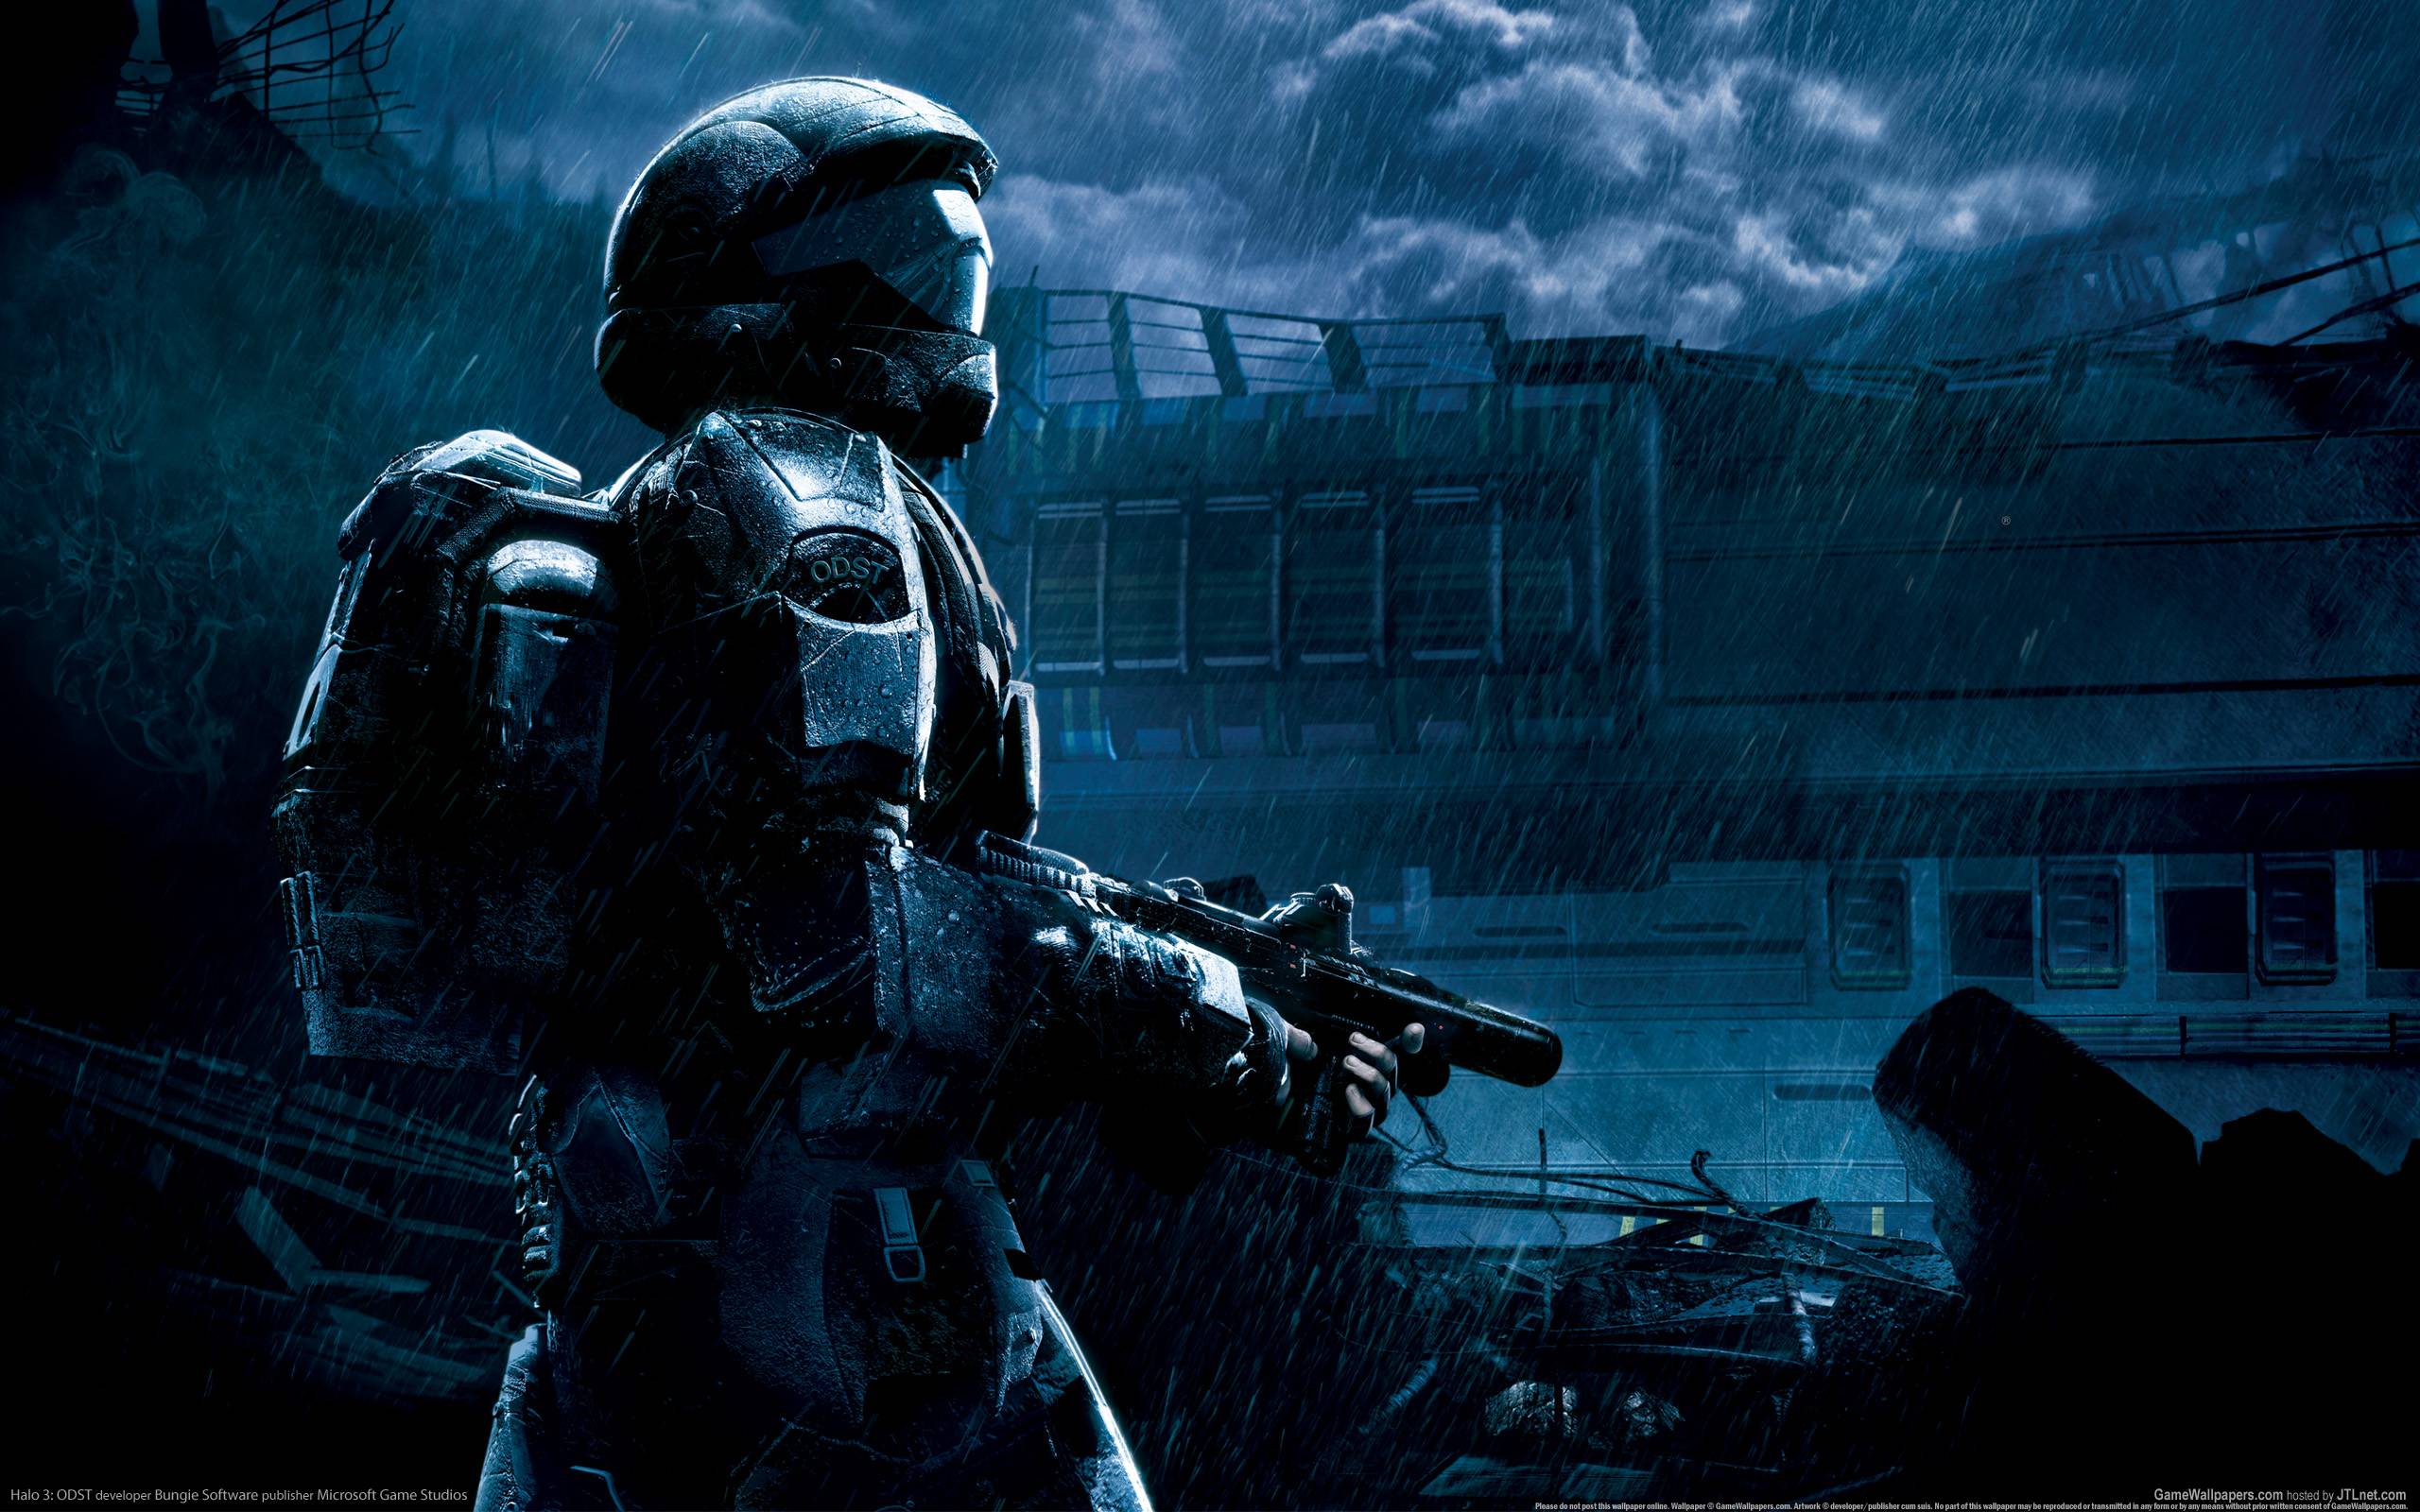 Halo 3 Odst Wallpapers HD Wallpapers : New Game photos